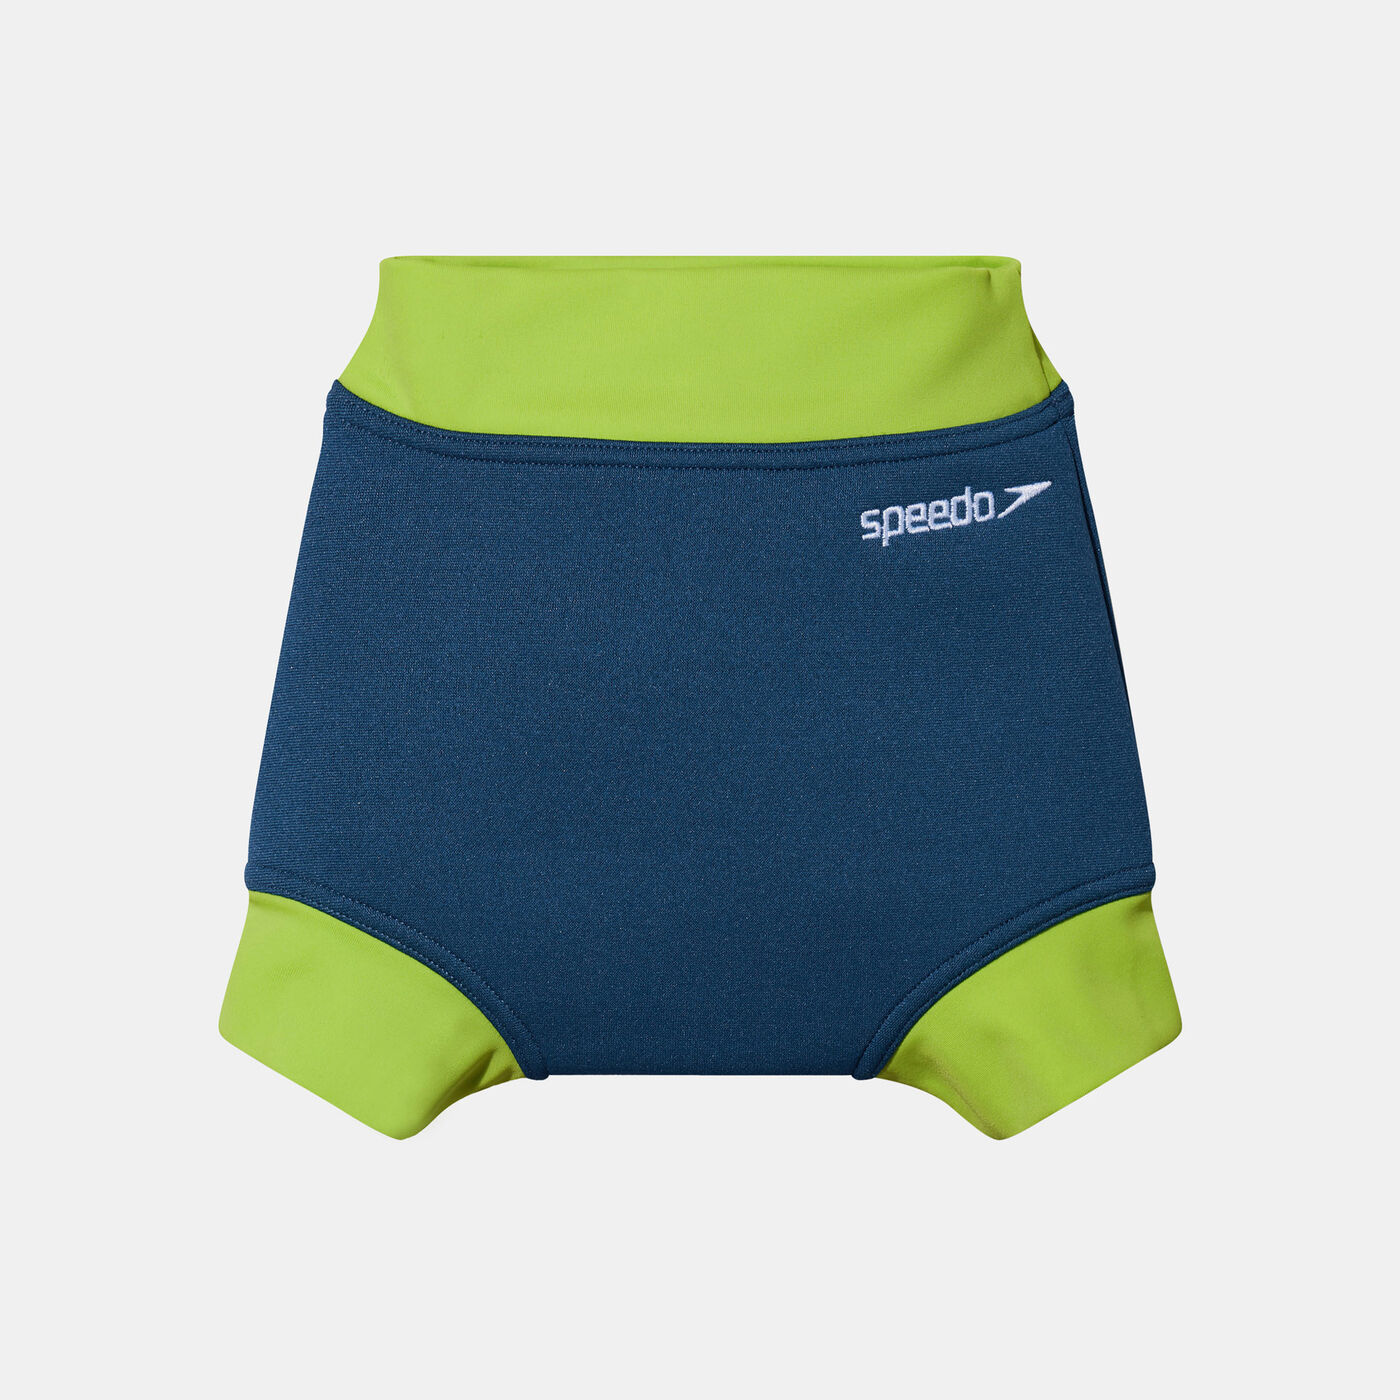 Kids' Swimming Essential Nappy Cover